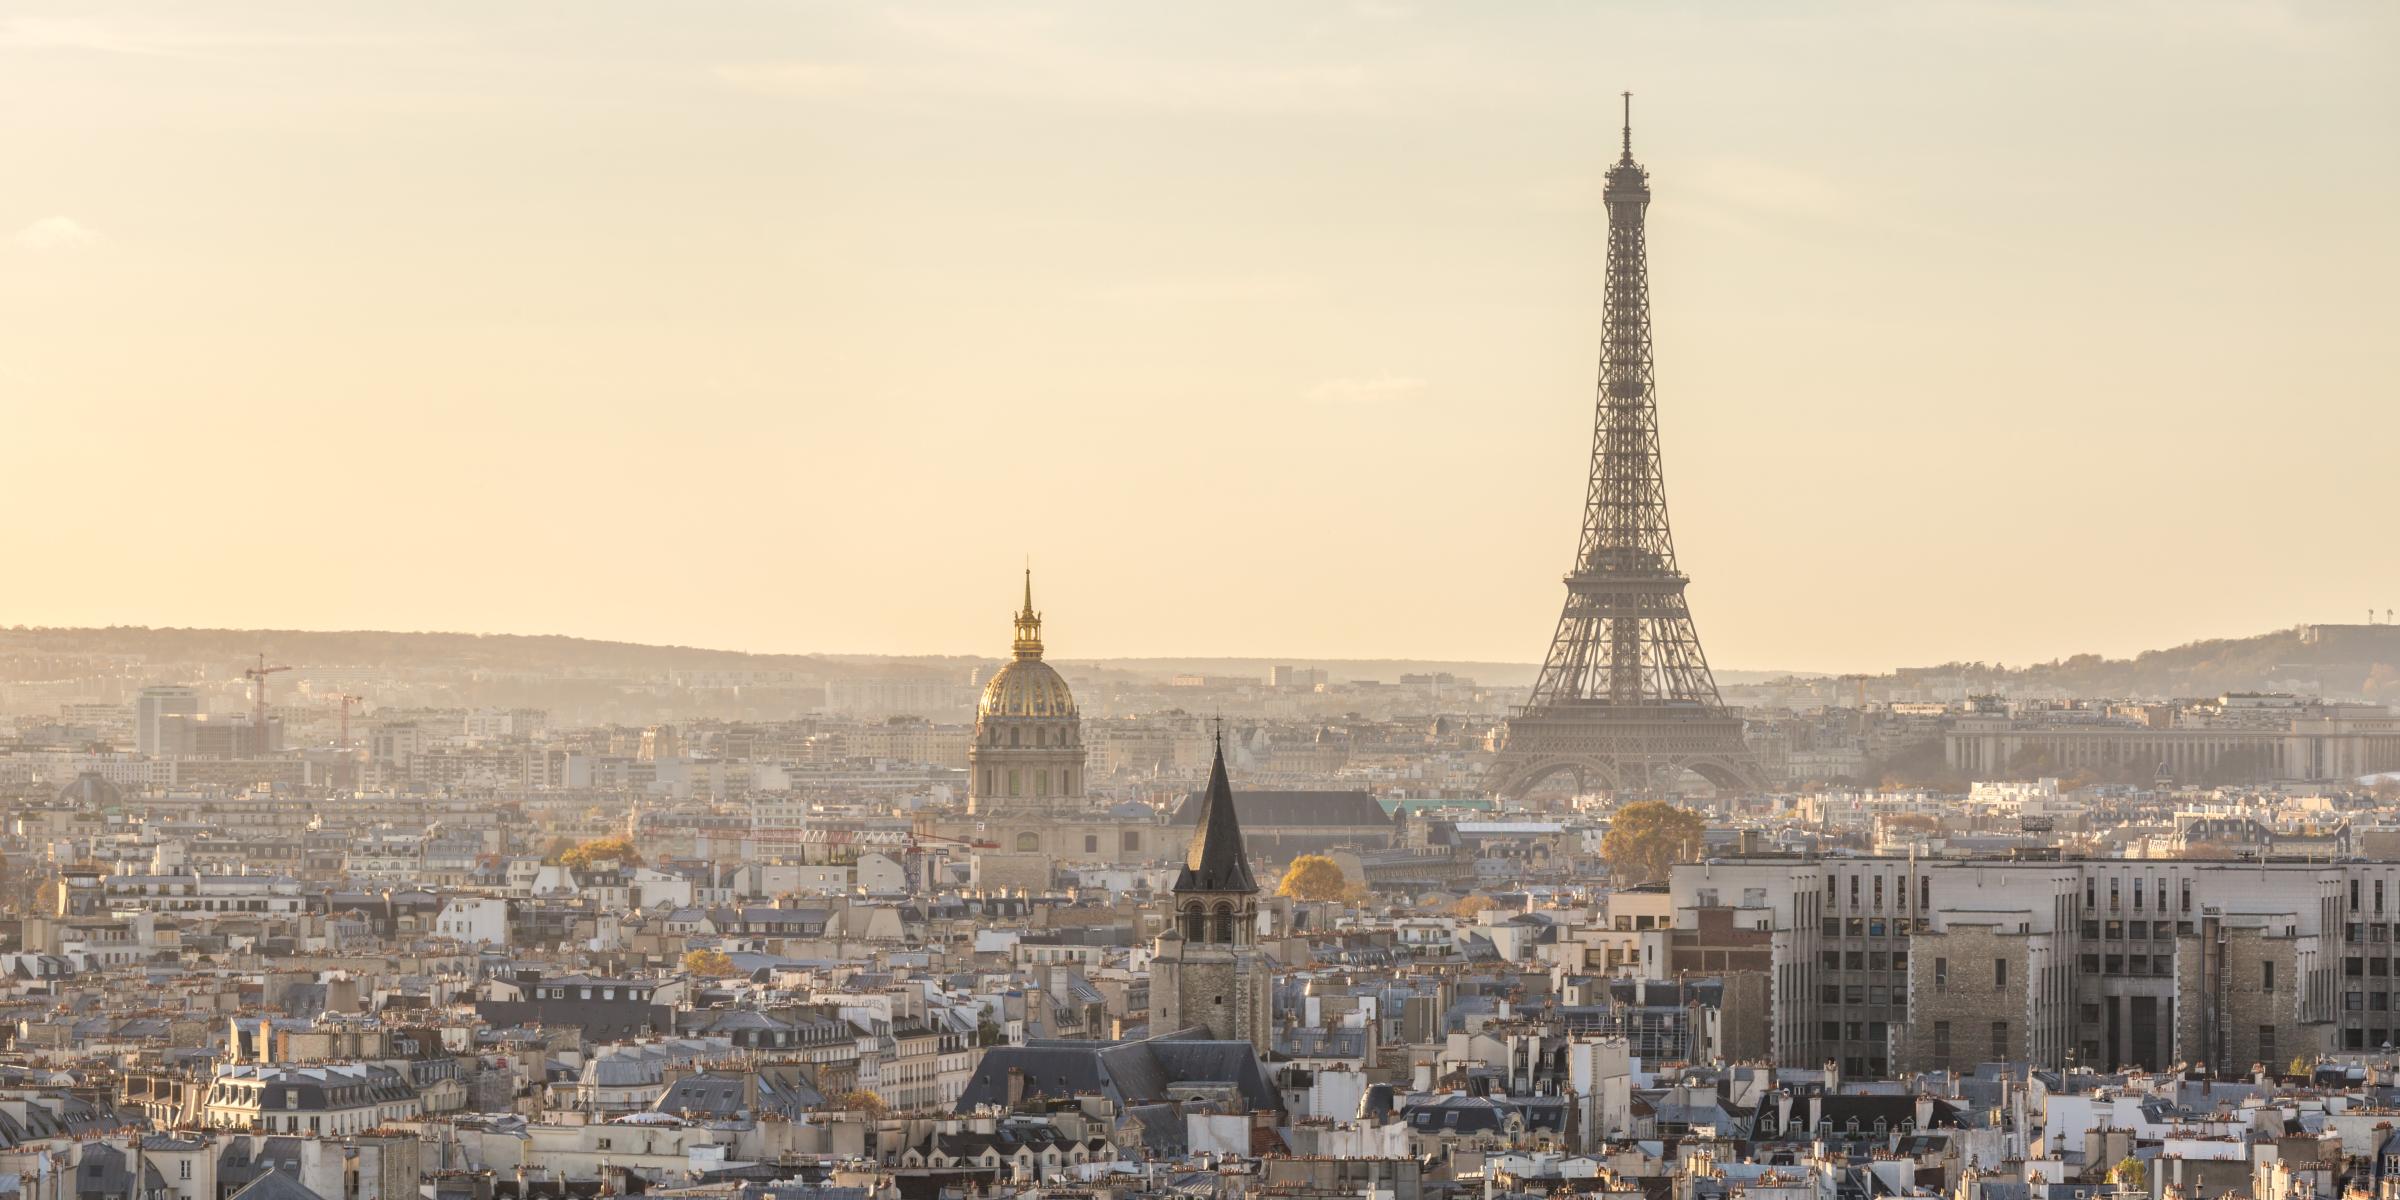 Panoramic of Eiffel tower and city of Paris